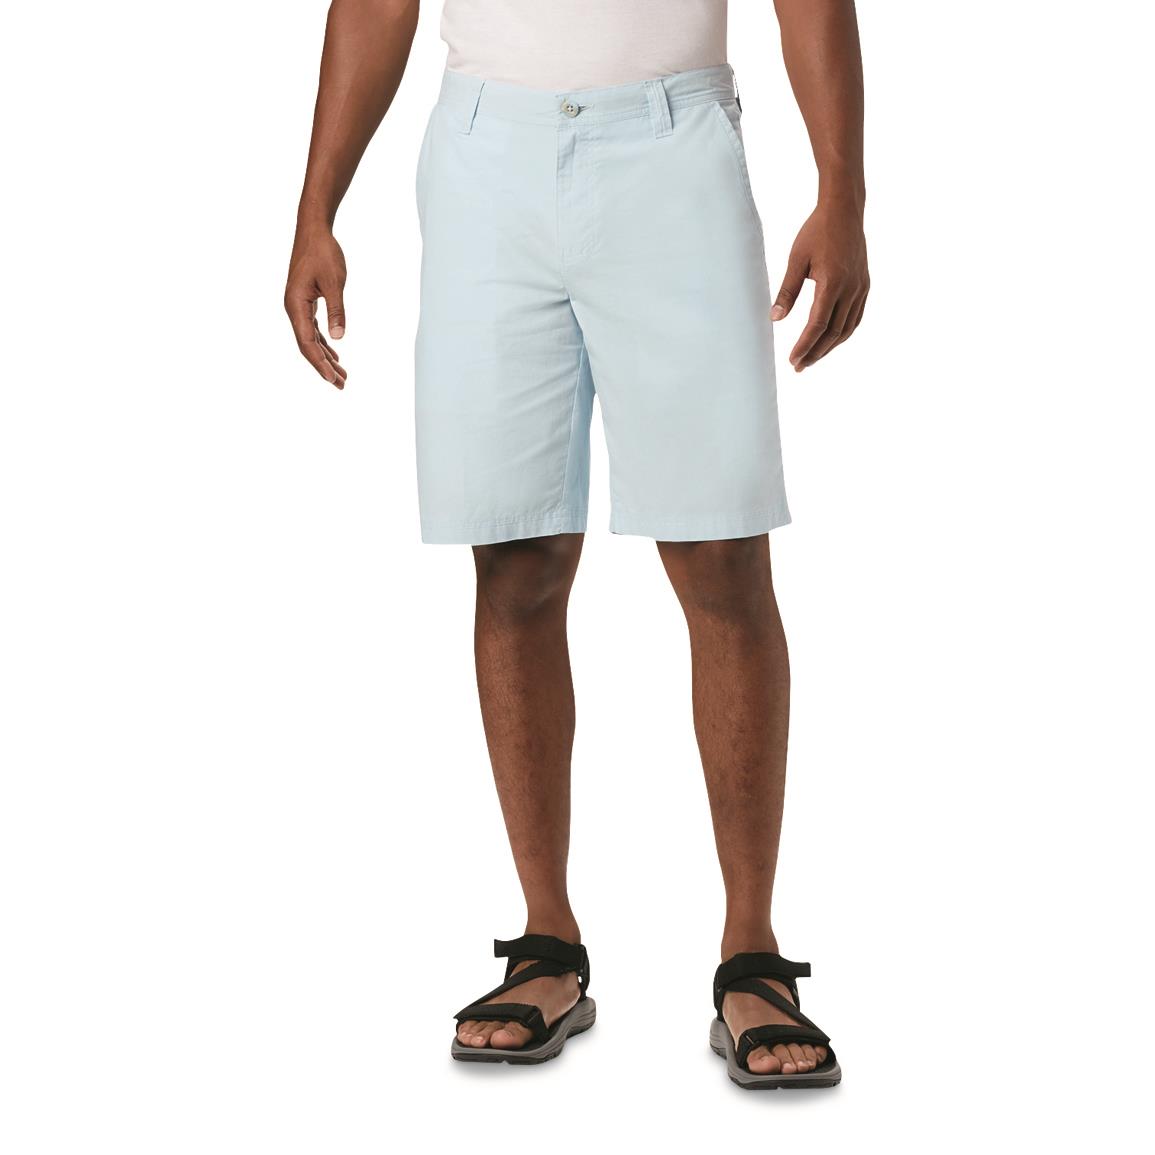 Columbia Men's Washed Out Shorts, Sky Blue